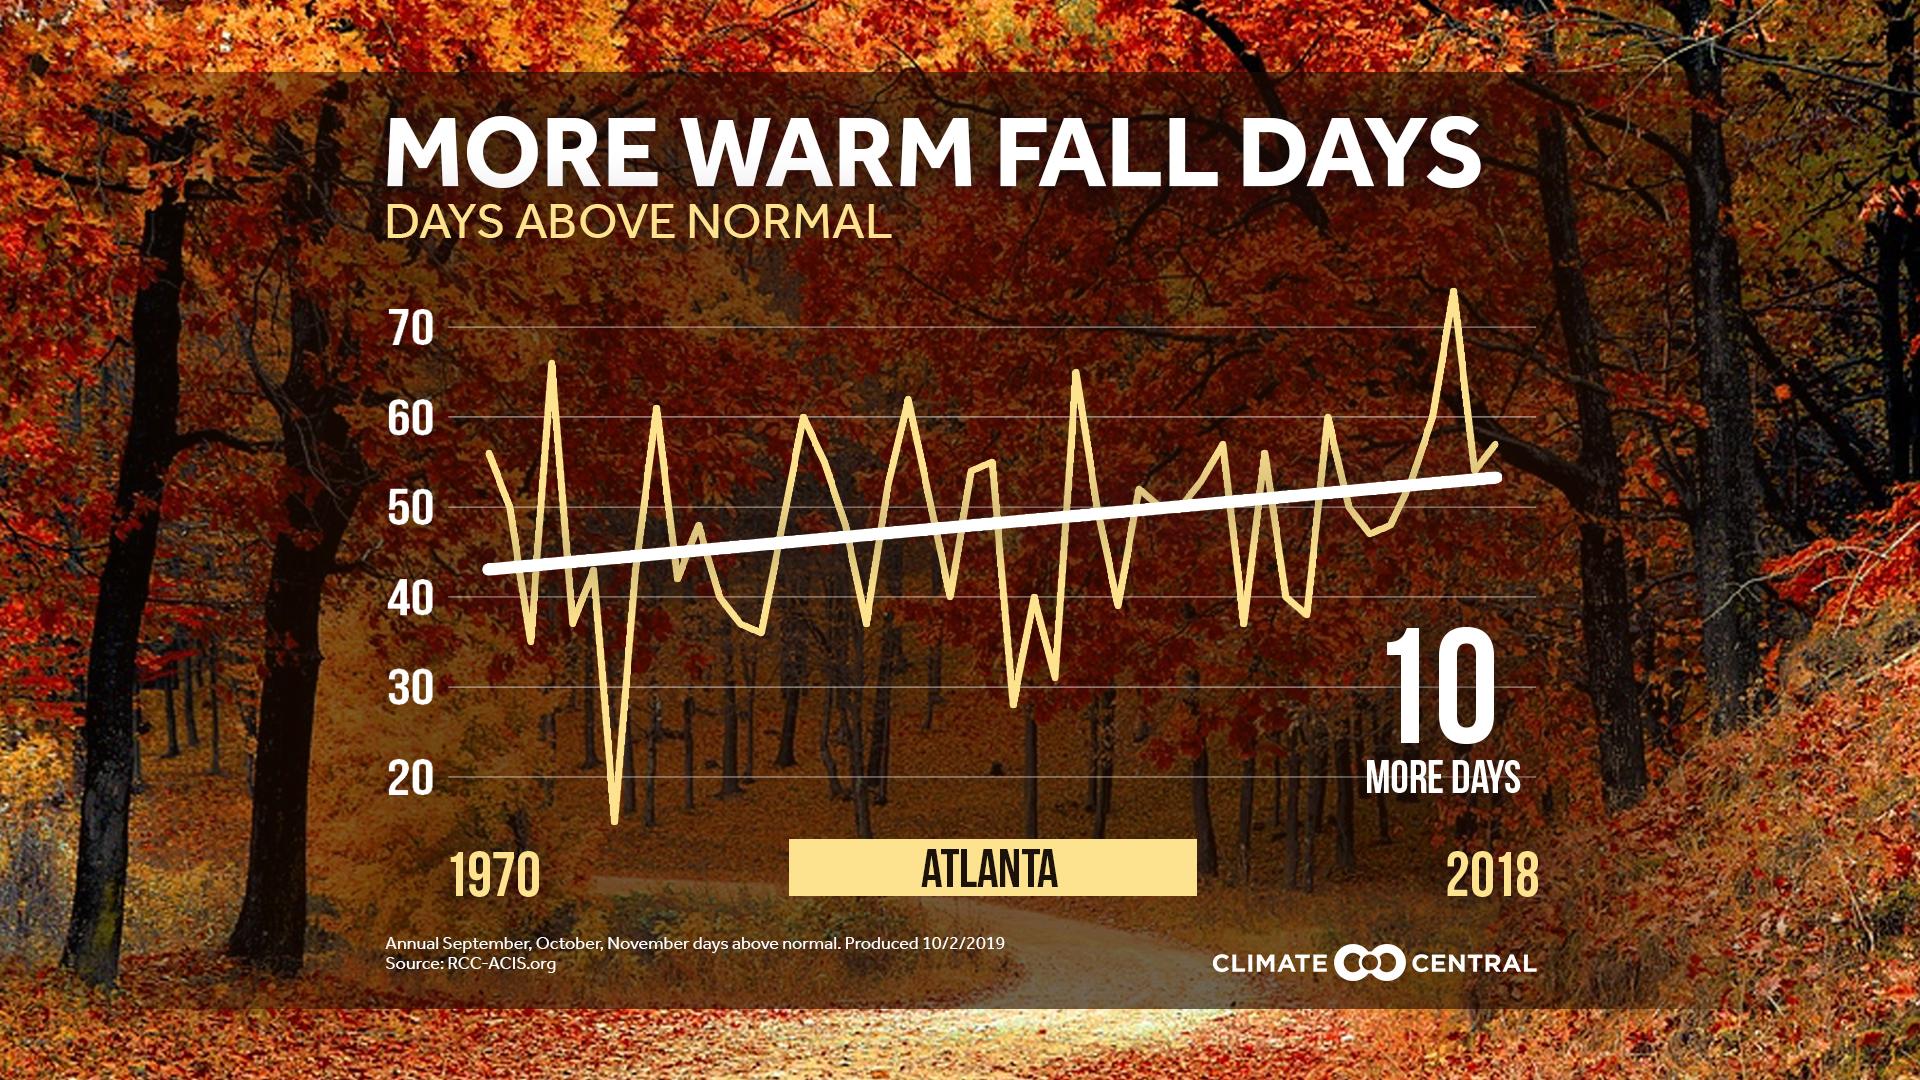 Market - Fall Days Above Normal